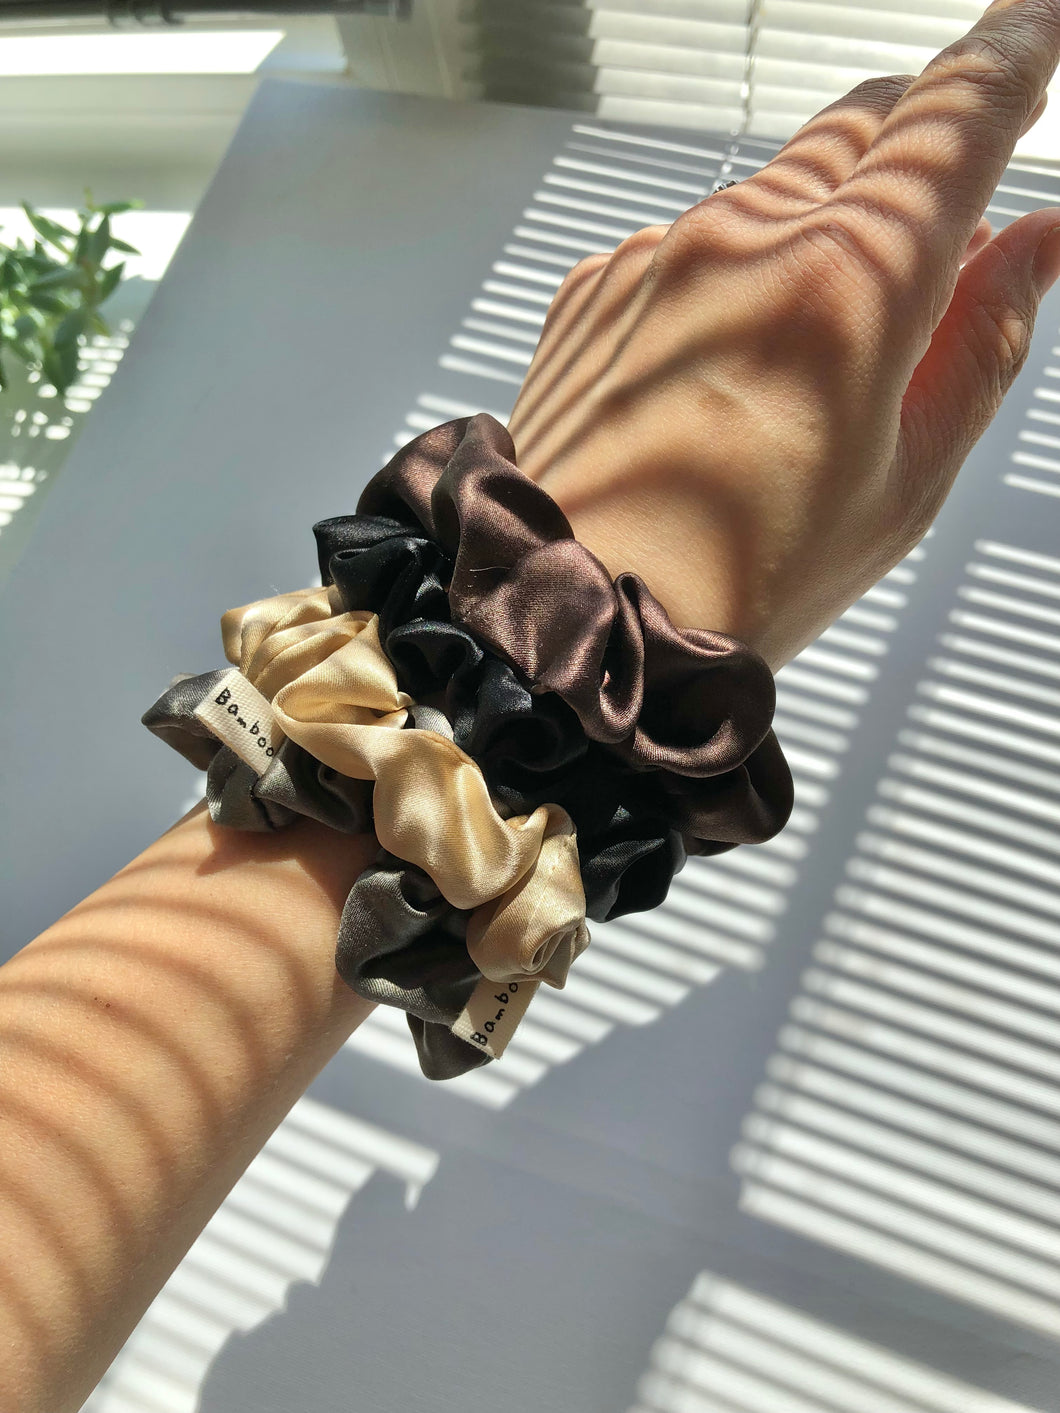 PURE SILK EVERY DAY SCRUNCHIES